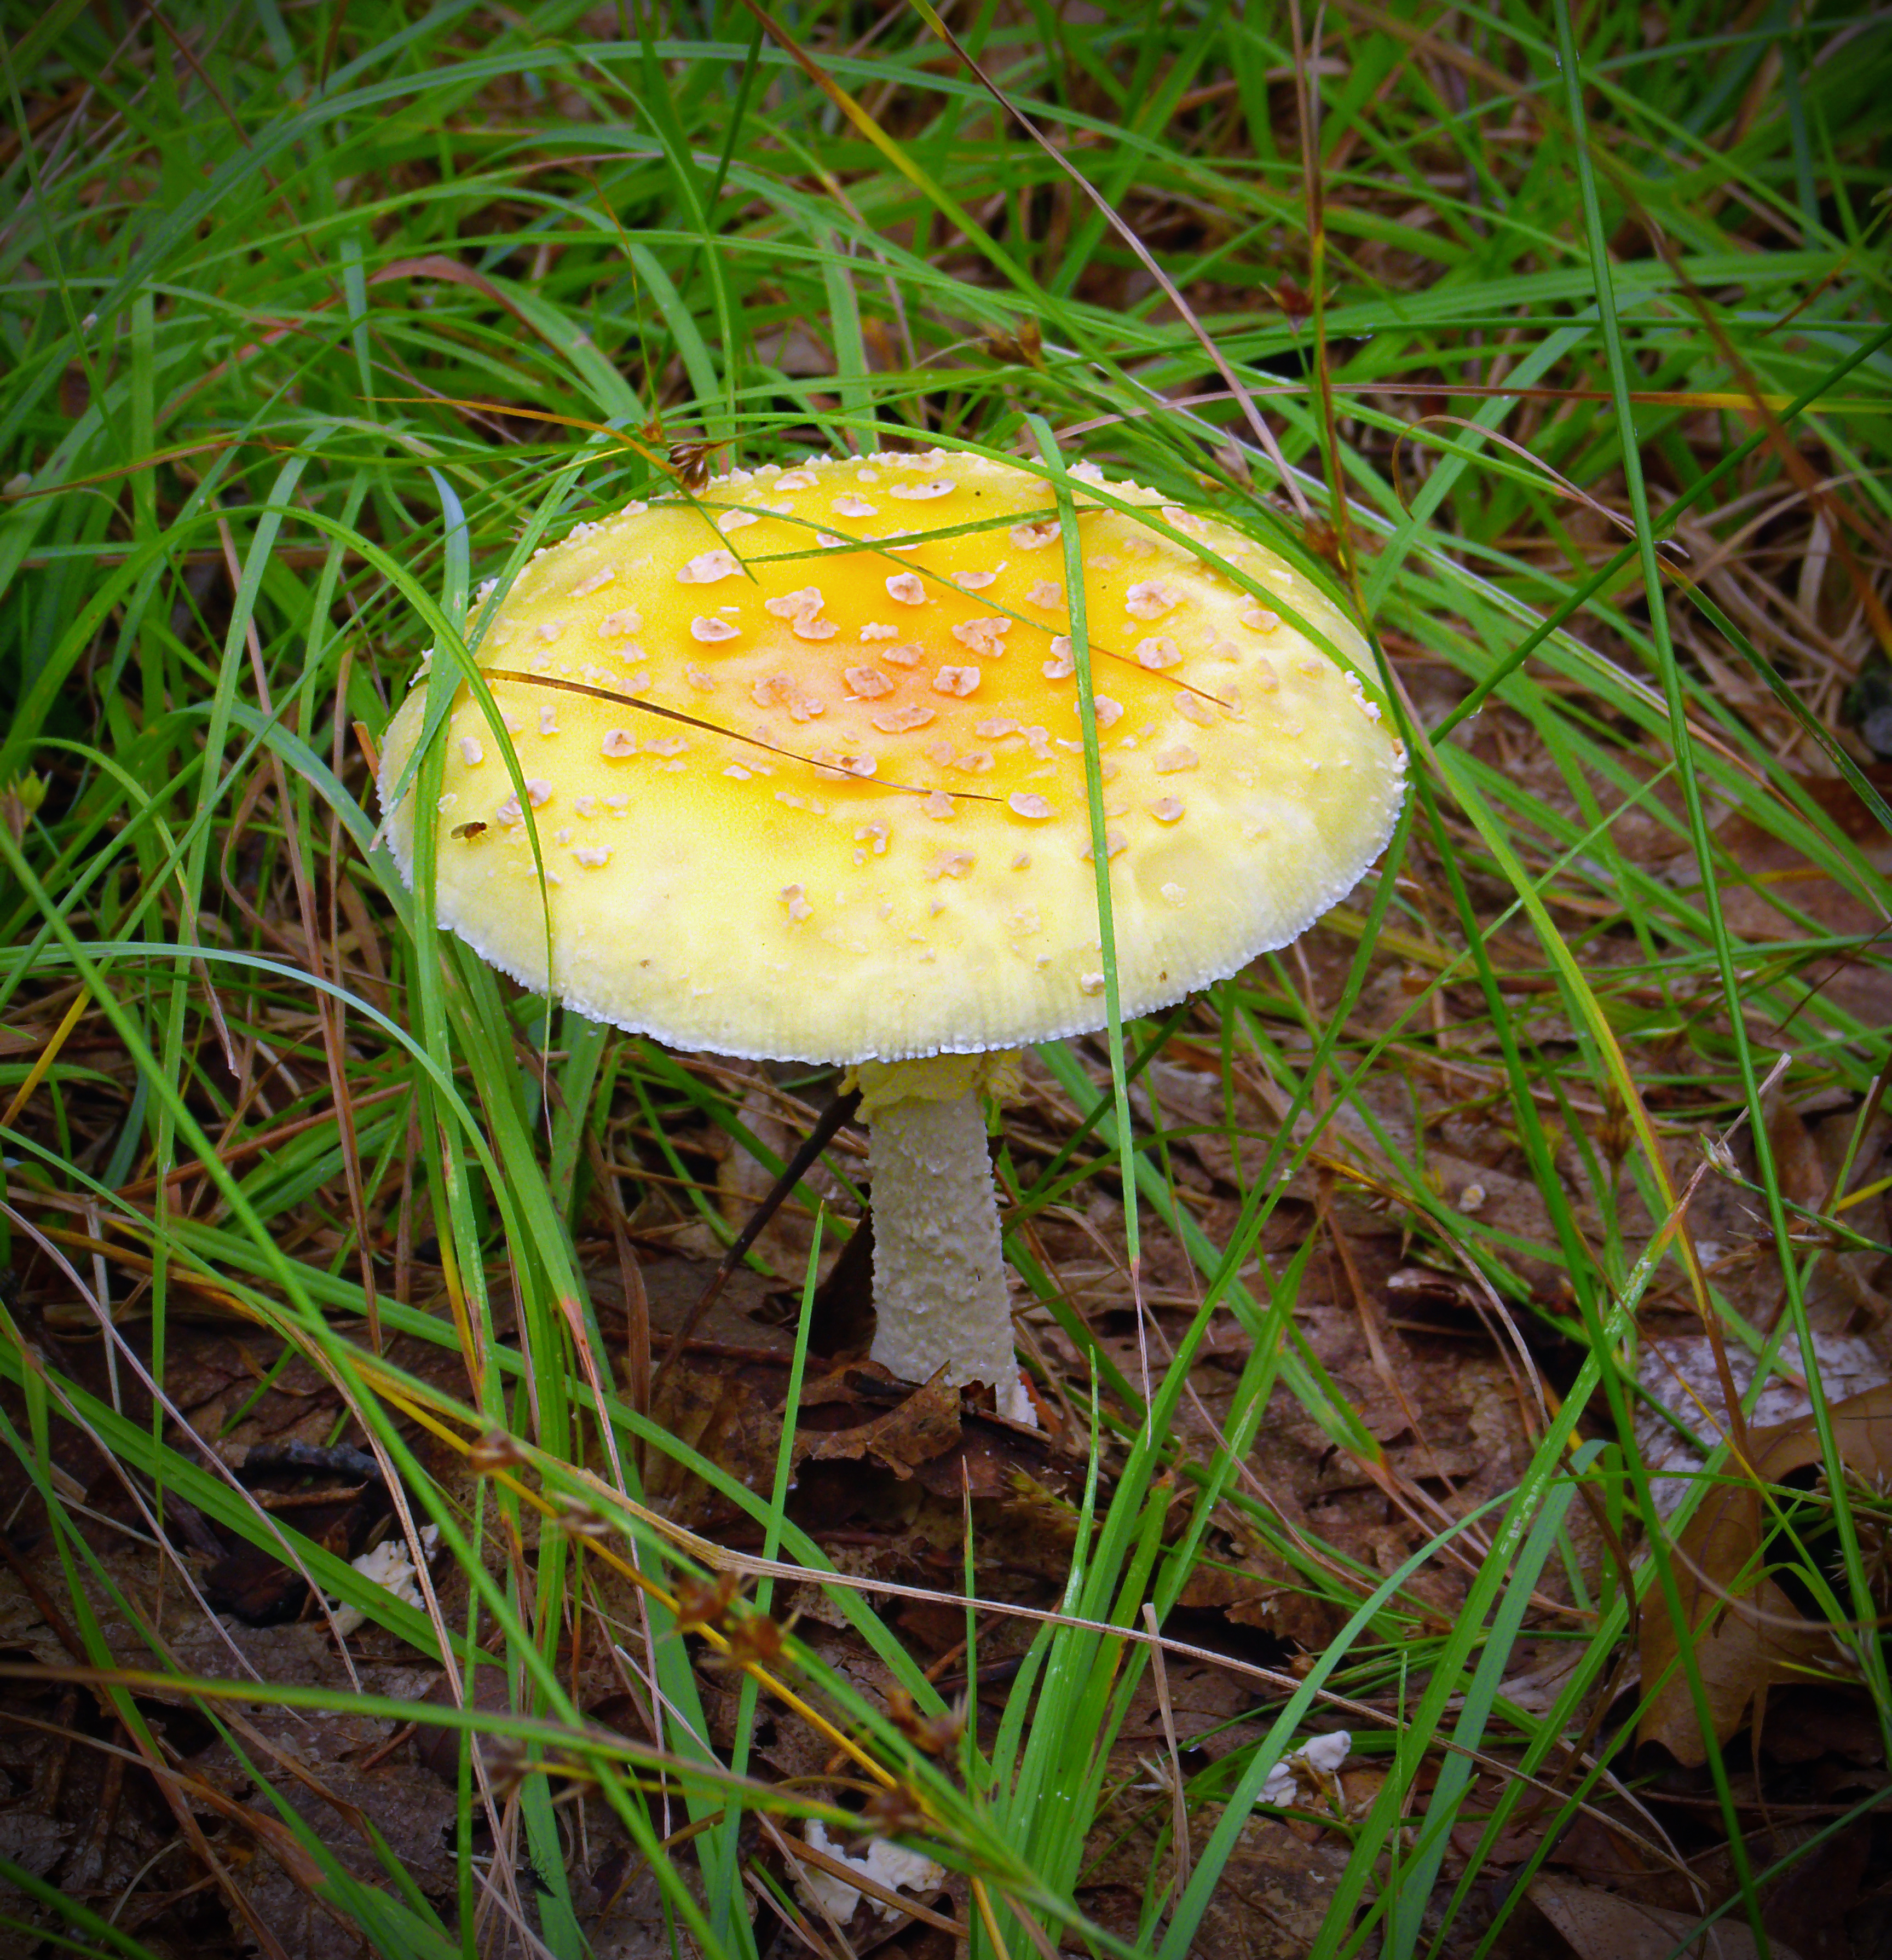 Free photo A mushroom with a yellow cap in green grass.